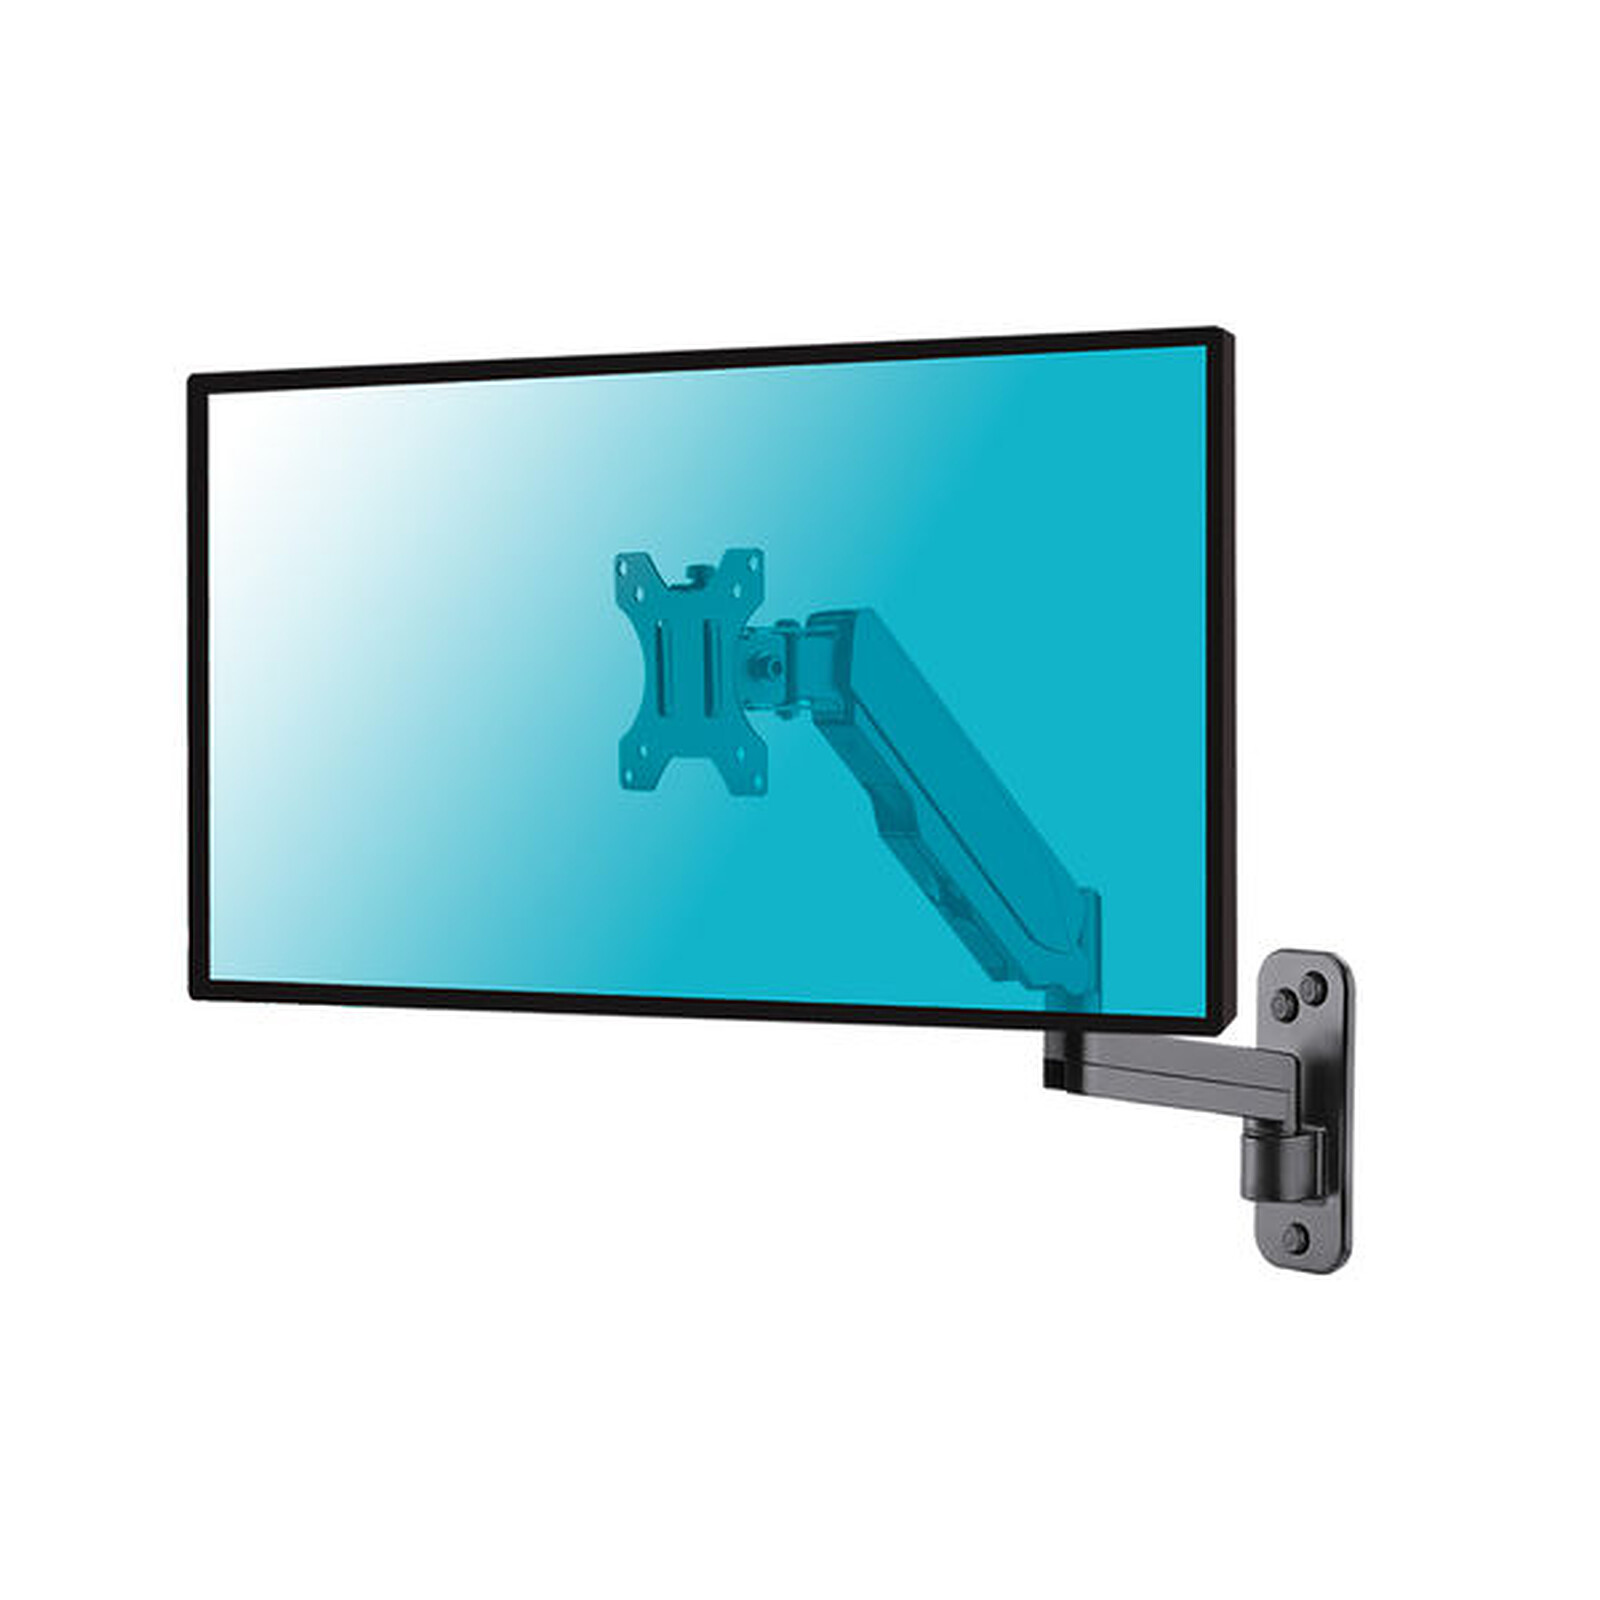 KIMEX 016-1501 - Support mural TV - LDLC